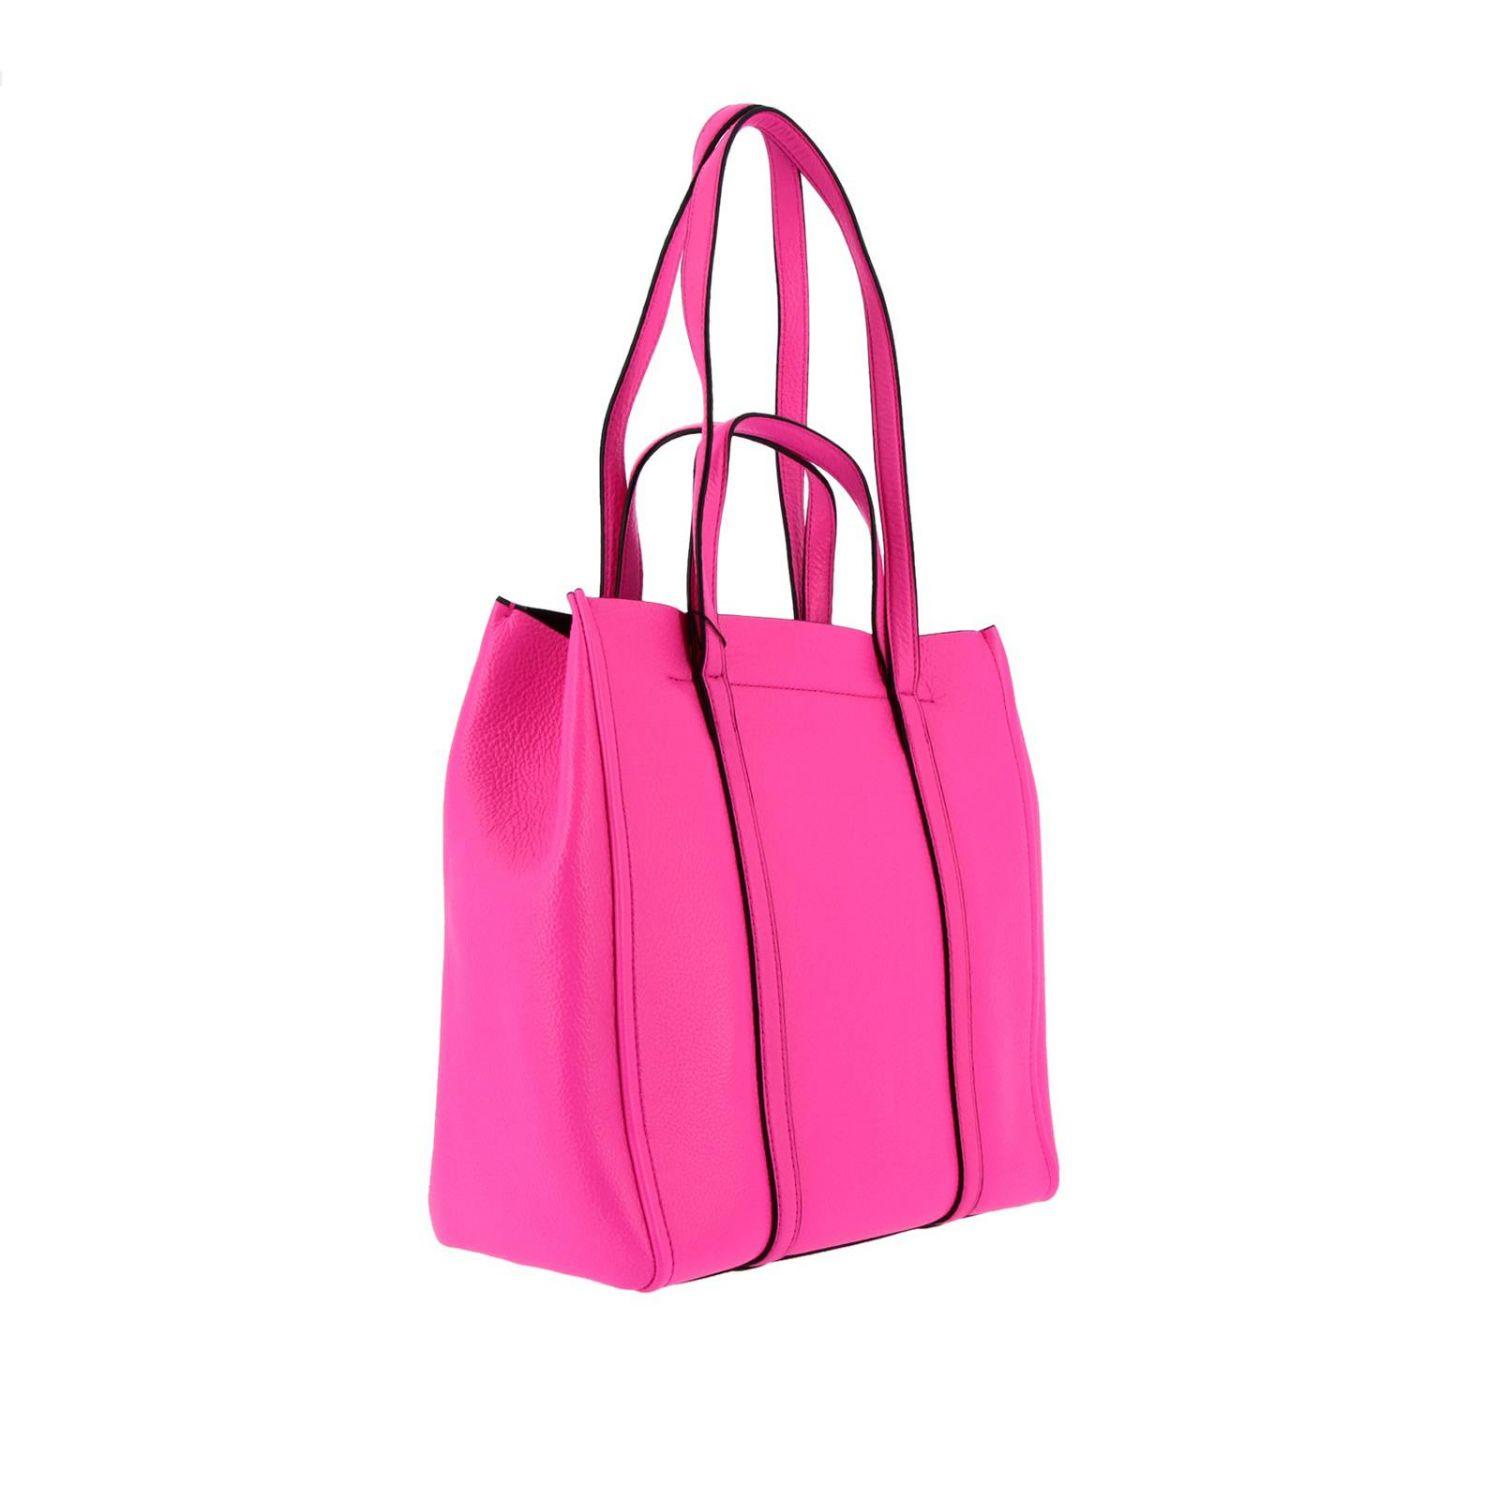 Marc Jacobs Leather The Tag Tote 27 Bag in Fuchsia (Pink) - Lyst